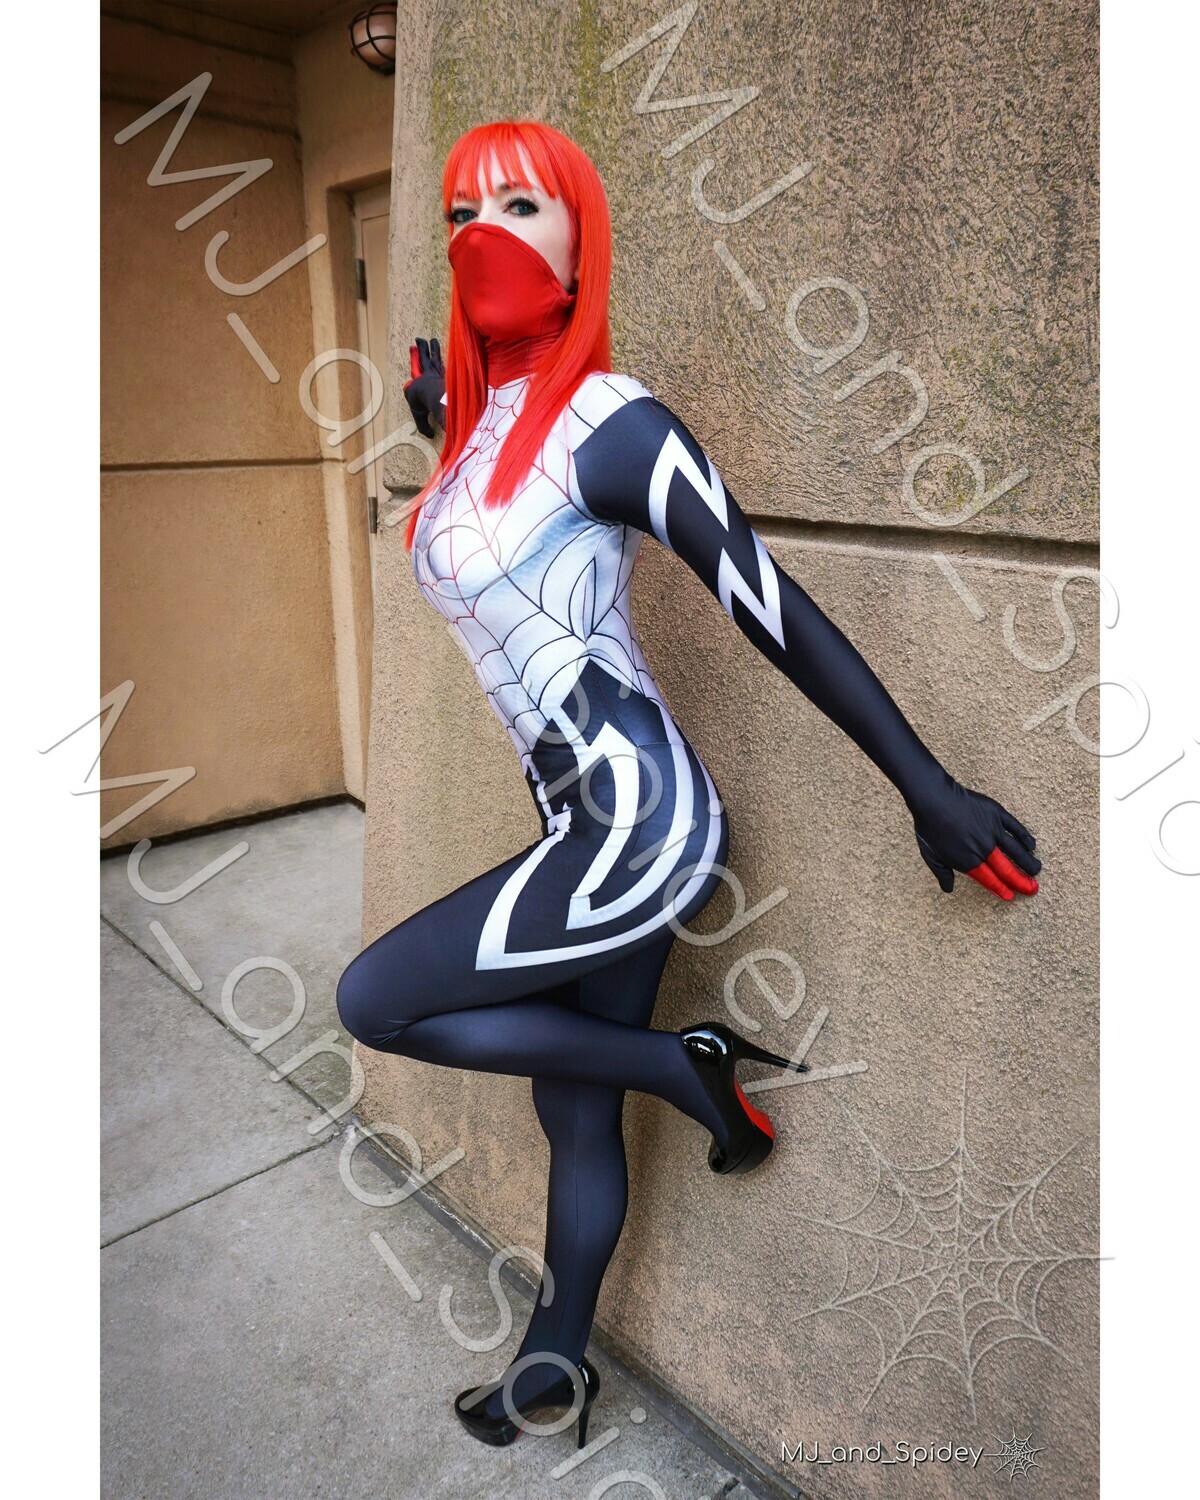 Marvel - Spider-Man - Mary Jane Watson - Silk No. 3 - 8x10 Cosplay Print (@MJ_and_Spidey, MJ and Spidey, Comics)